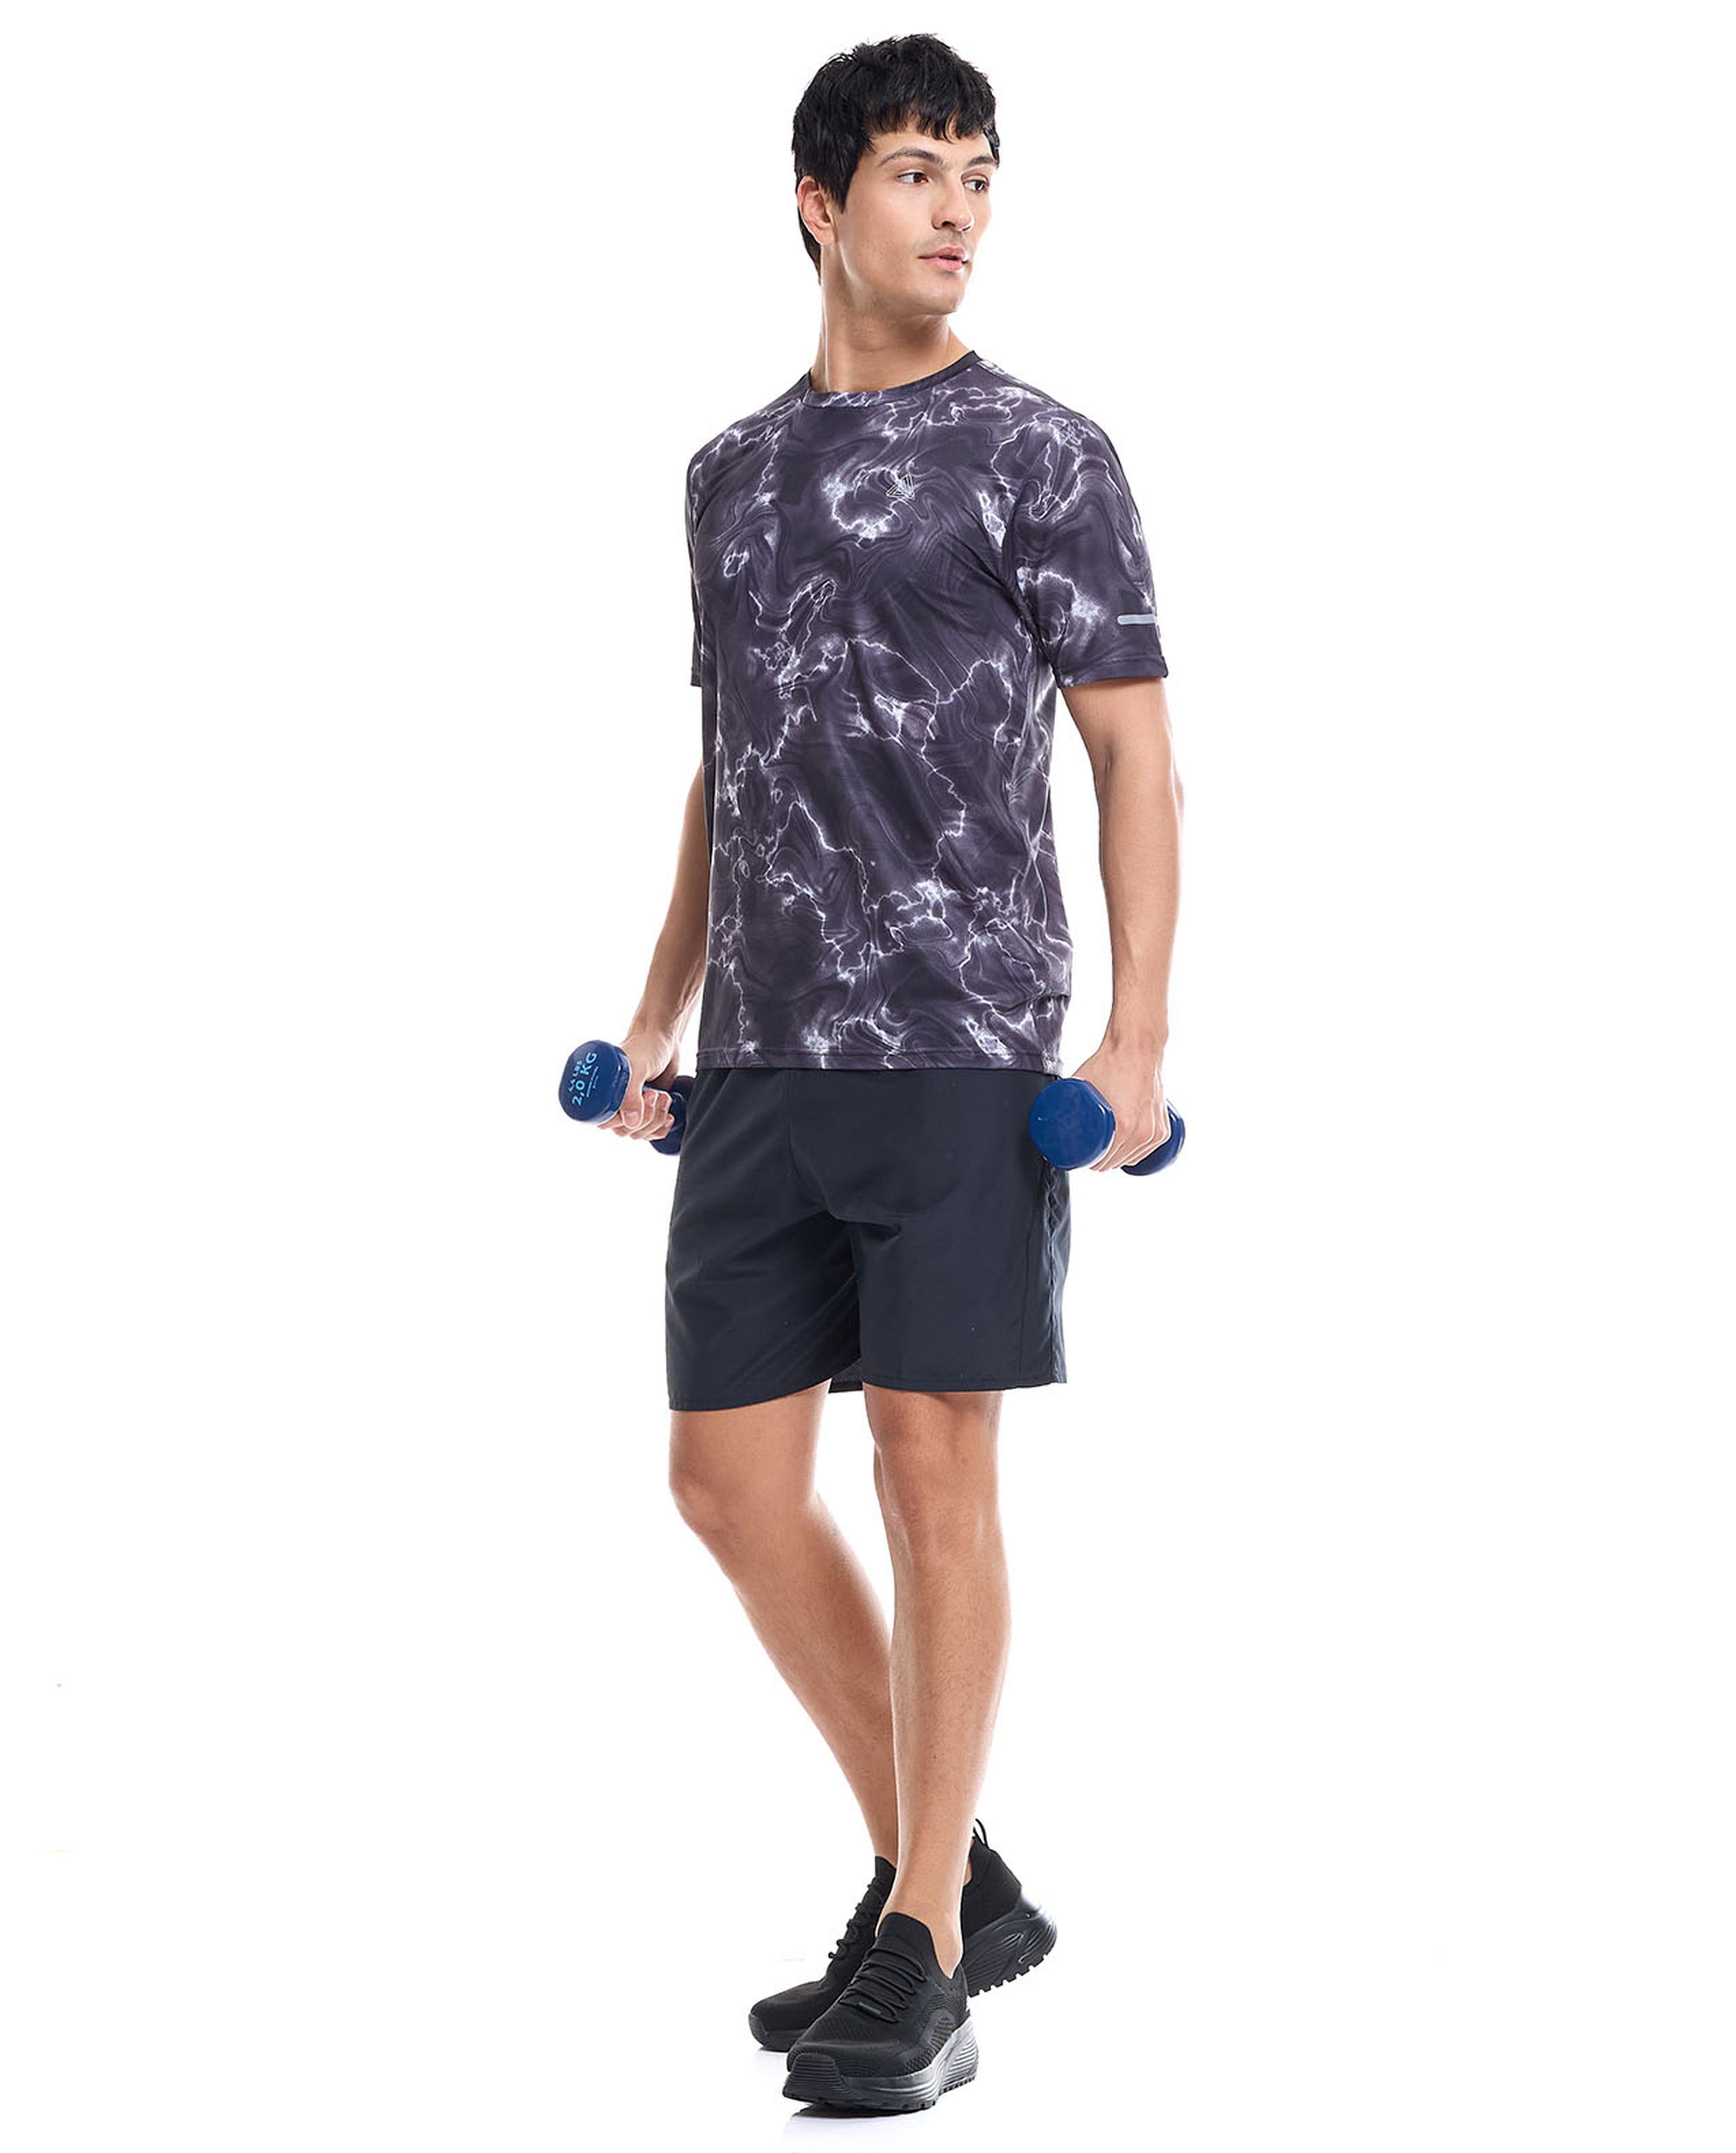 Patterned Active T-Shirt with Crew Neck and Short Sleeves